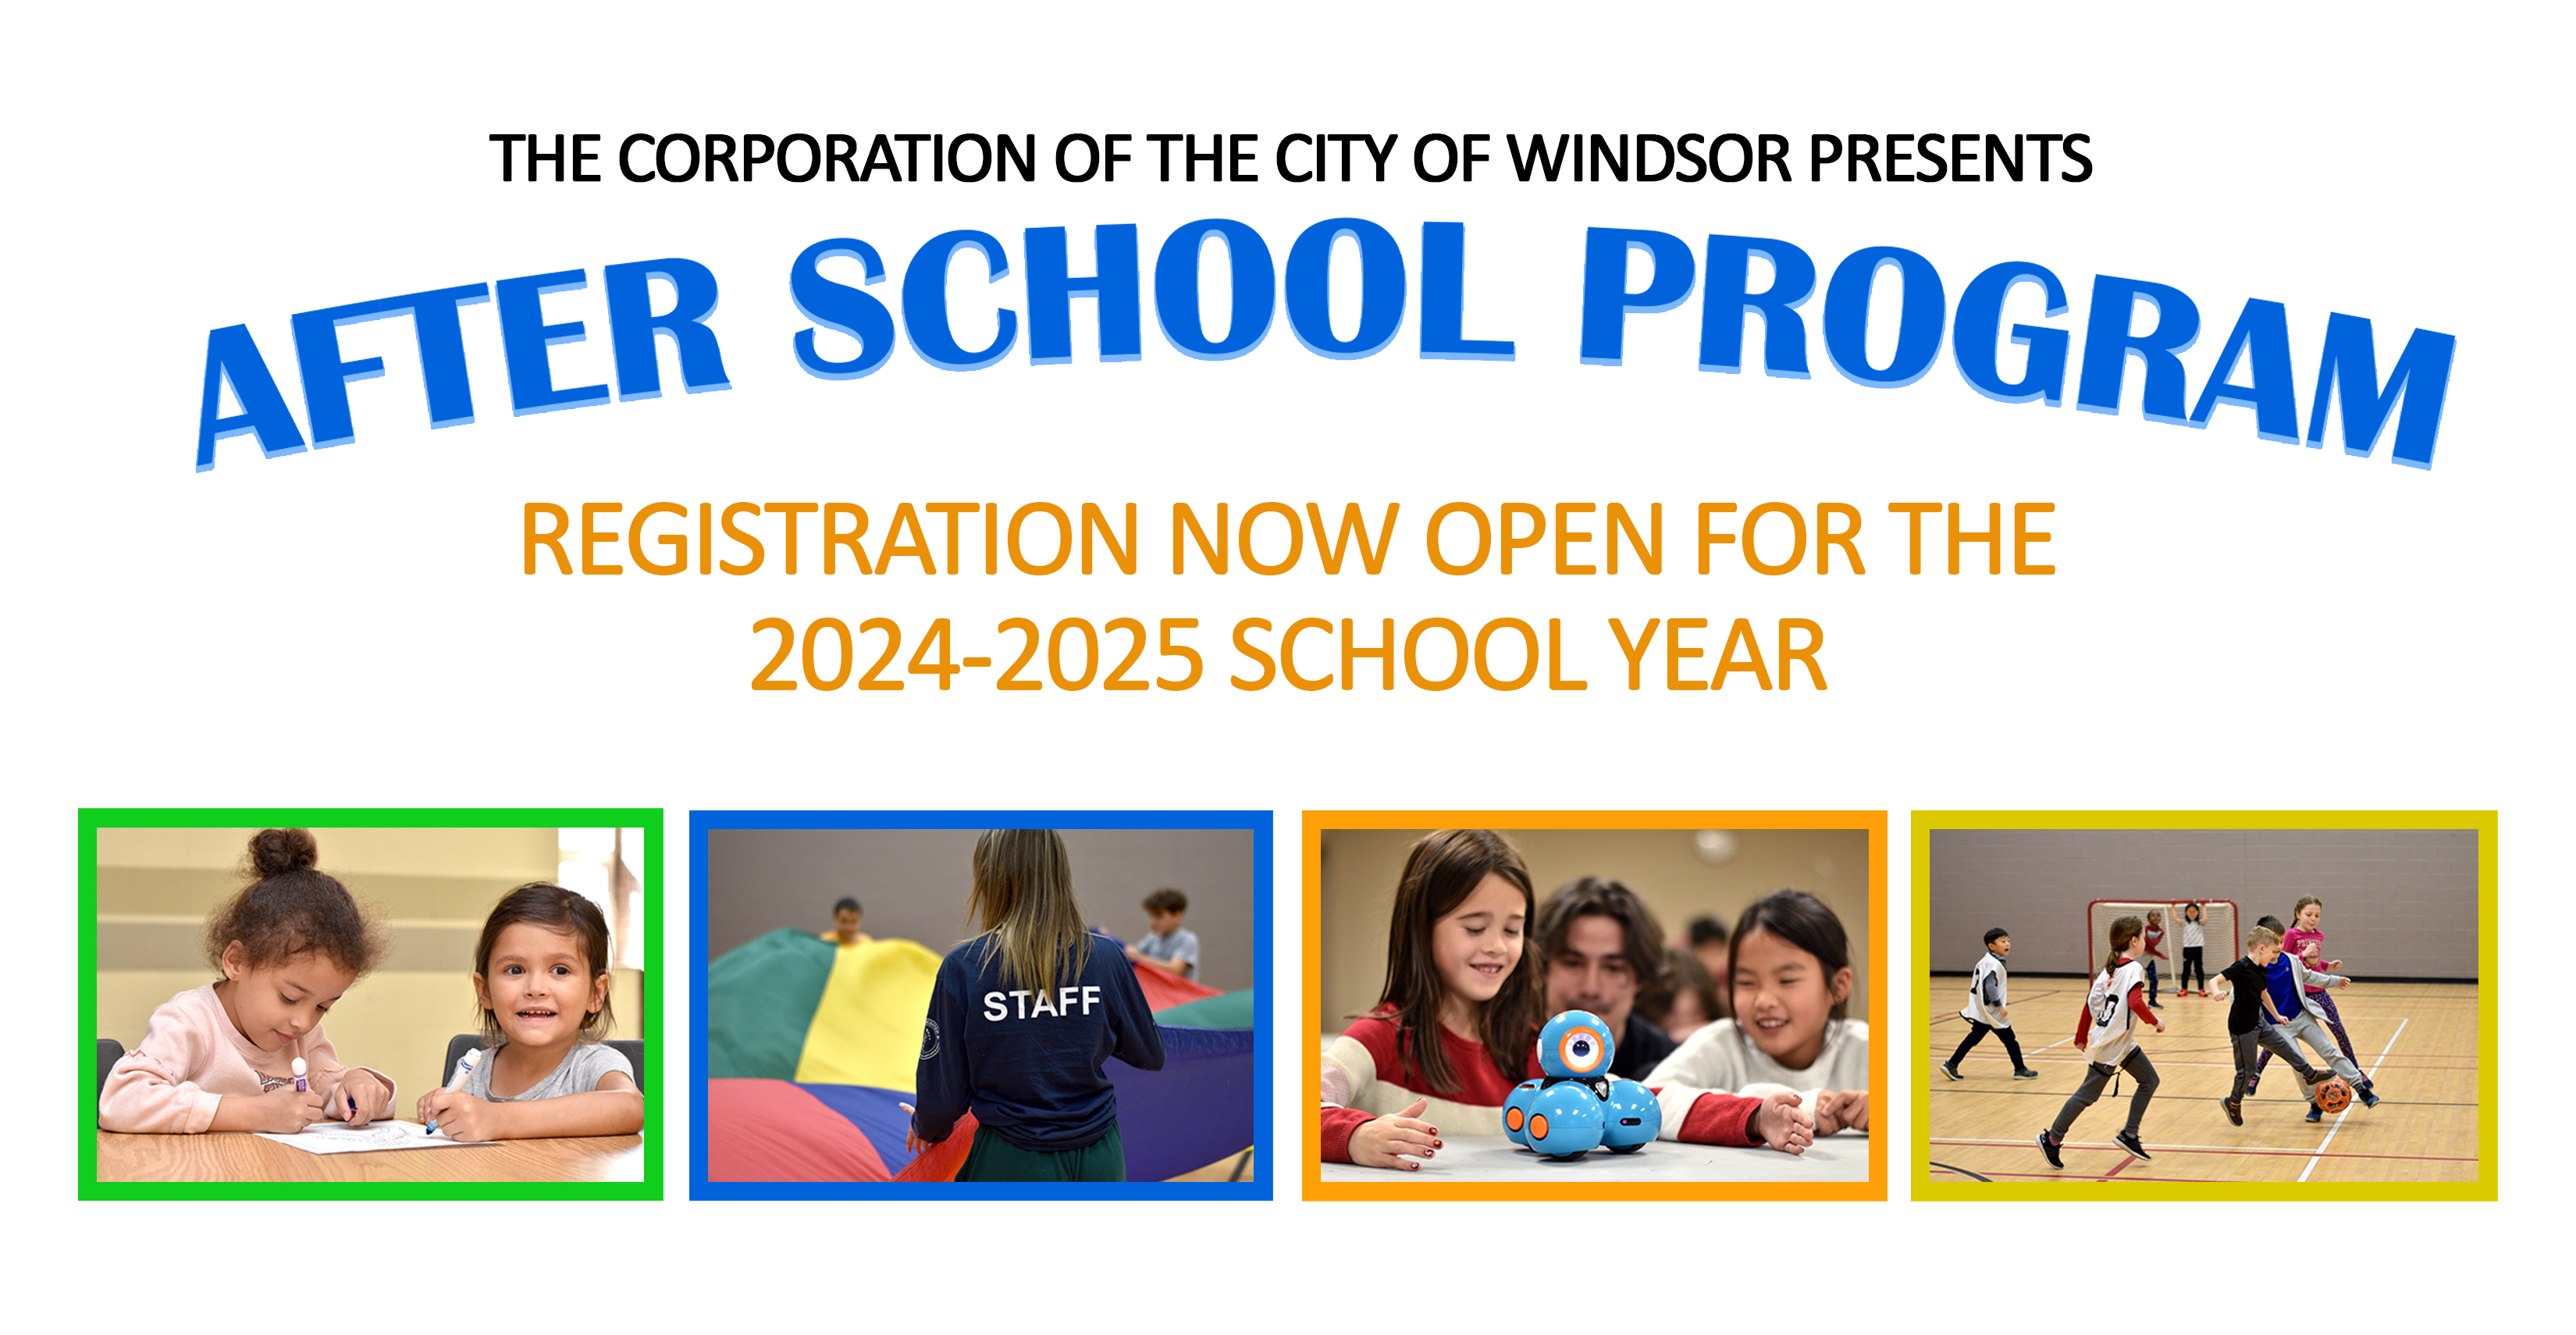 Text reads The Corporation of the City of Windsor presents After School Program. Registration is now open for the 2024-2025 school year. Photos at the bottom of the banner show kids participating in crafts; gym games; and science, technology, engineering and mathematics (STEM) activities.